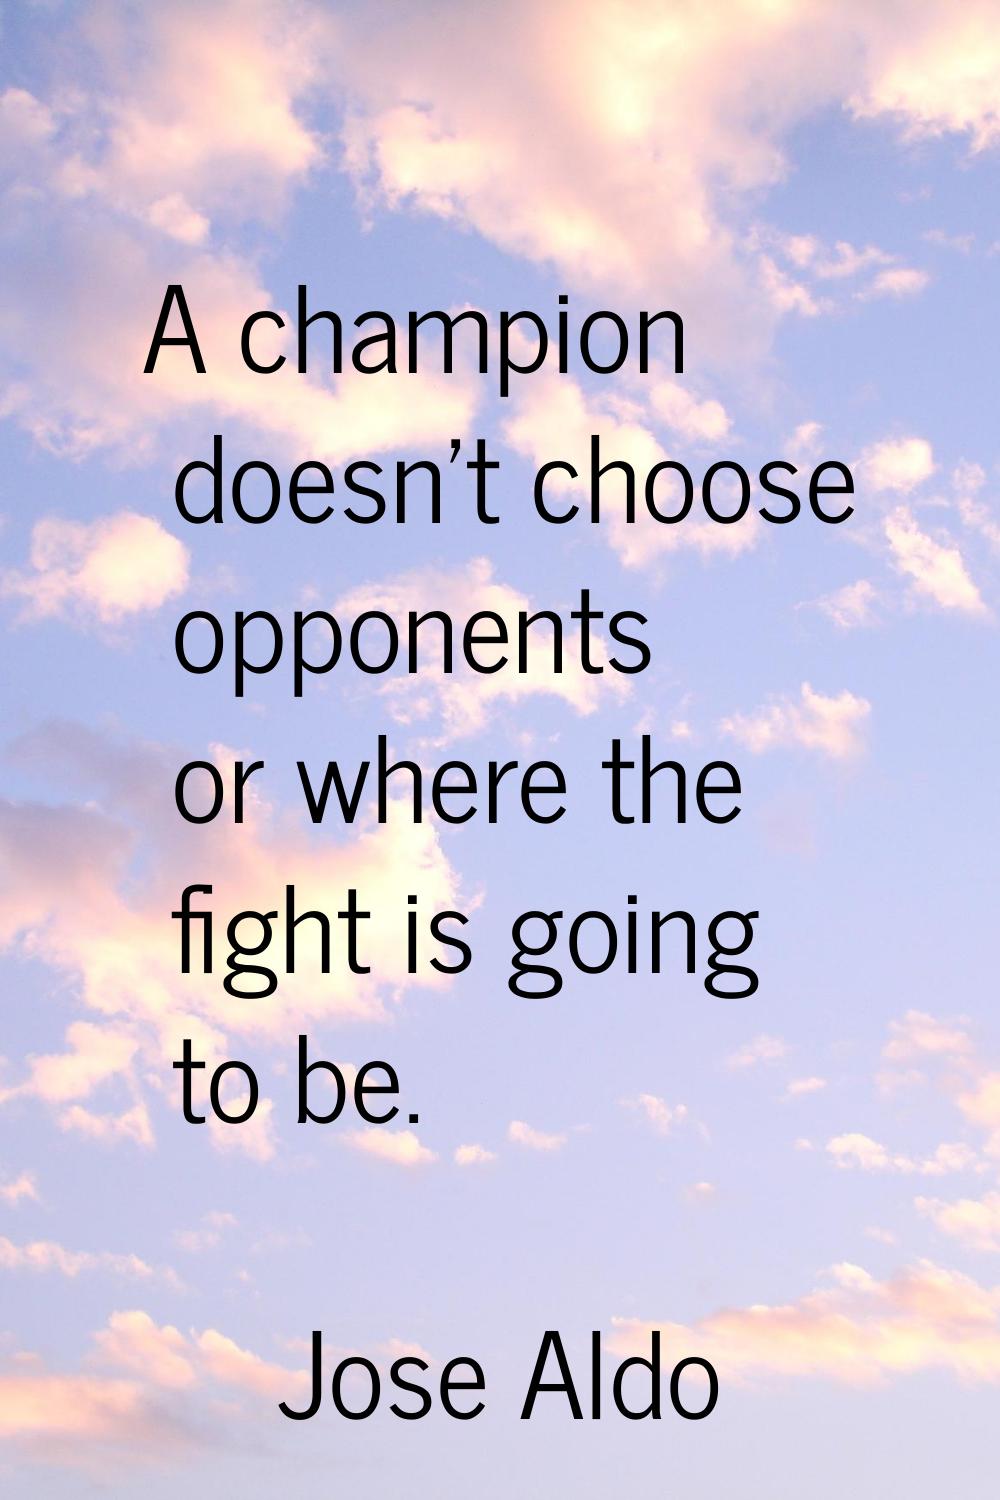 A champion doesn't choose opponents or where the fight is going to be.